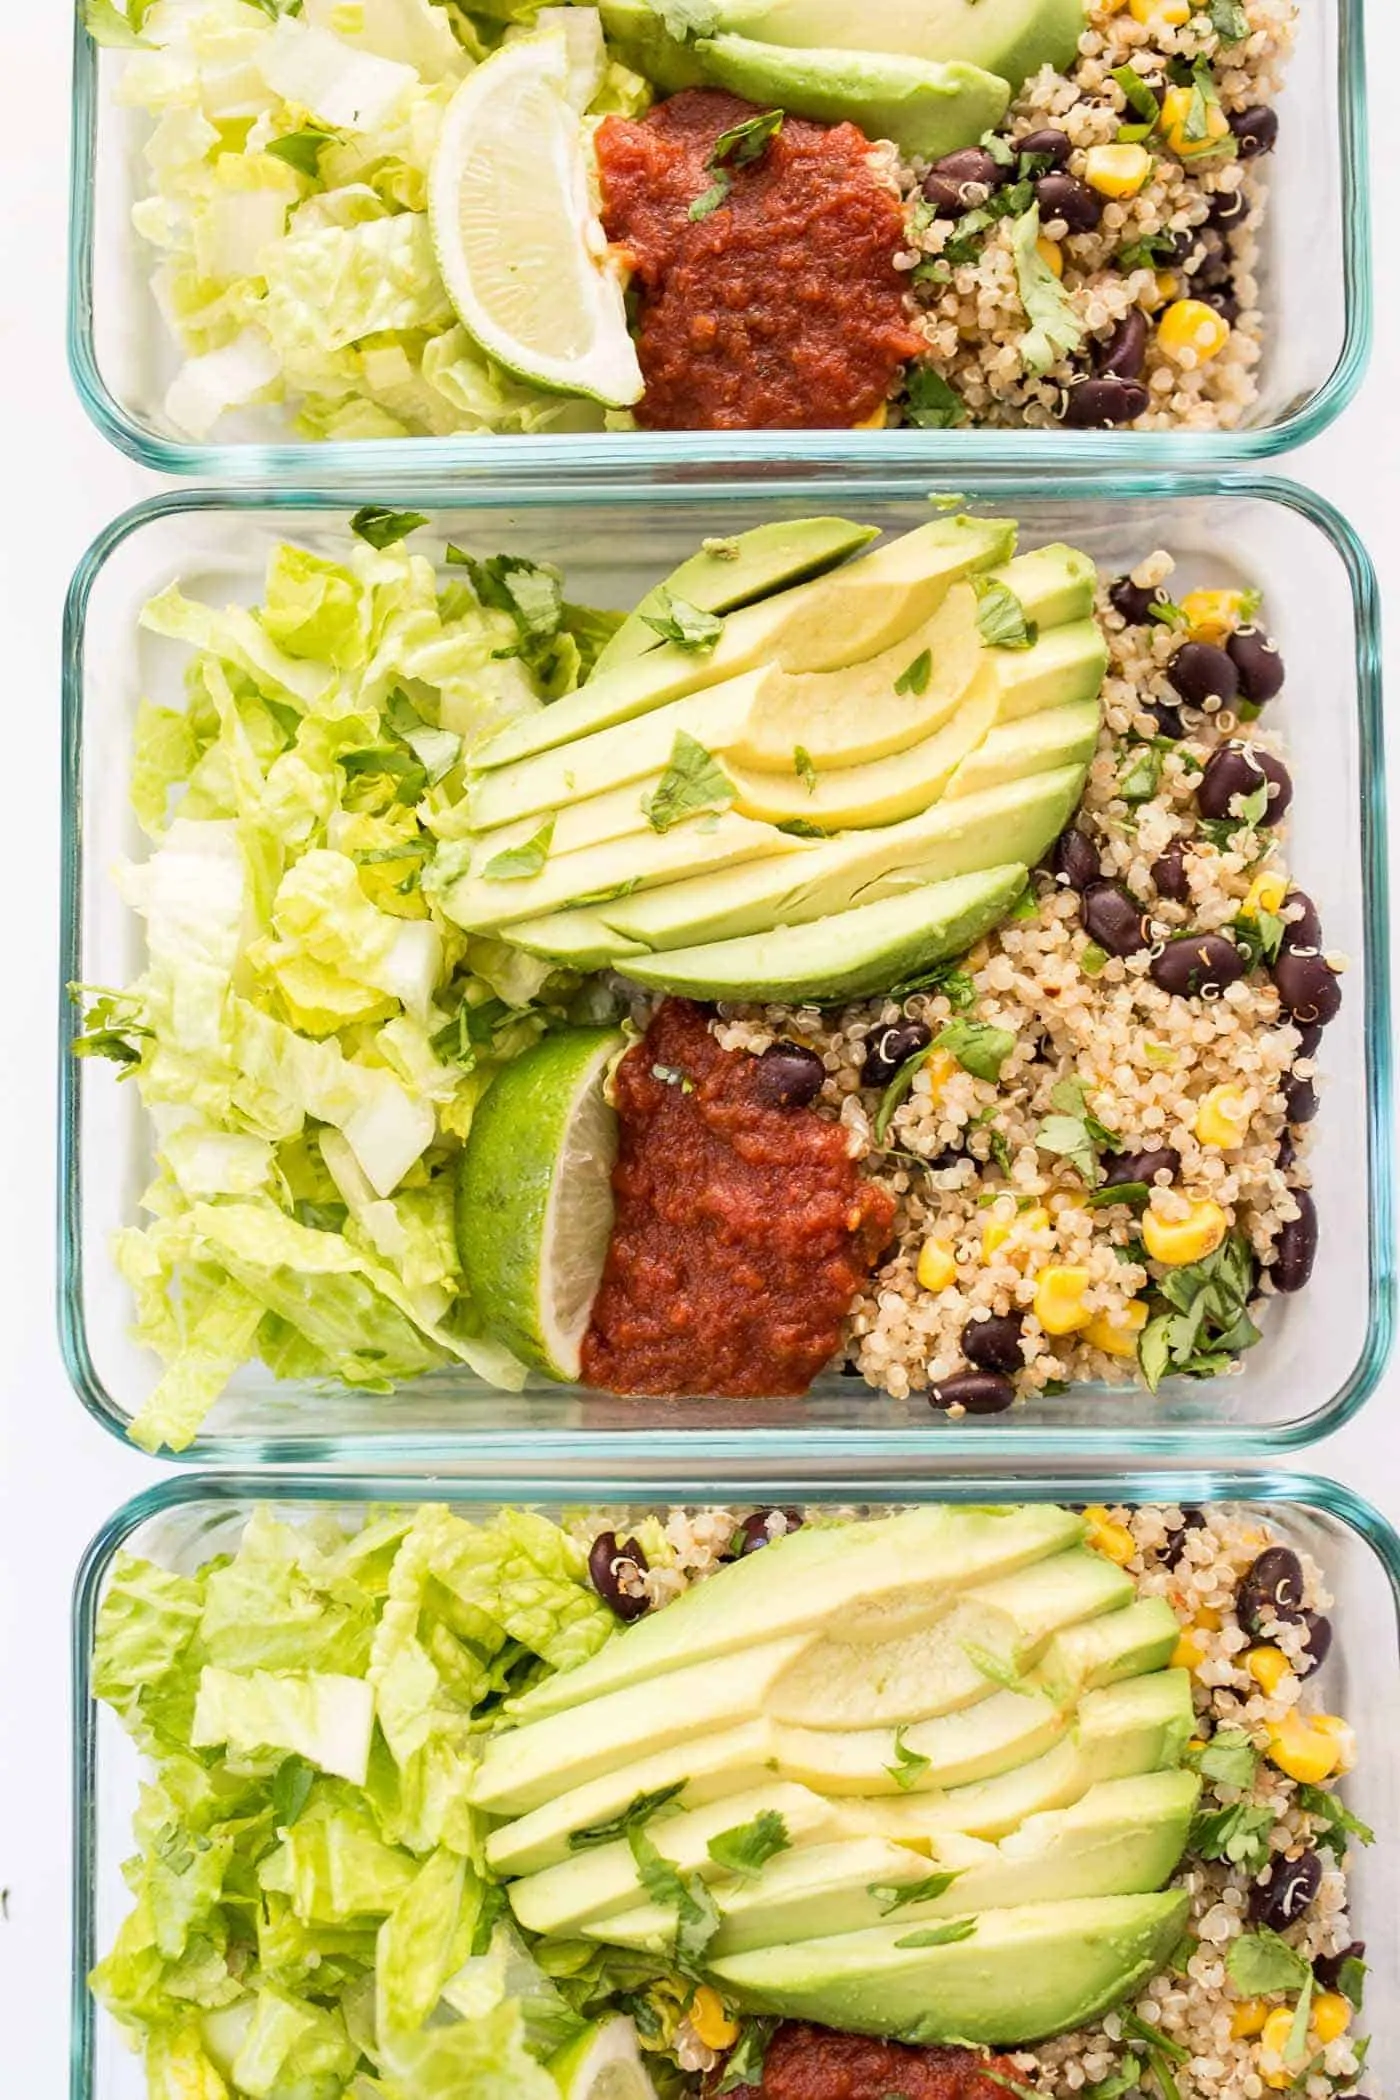 Toxin Free Meal Prep Tools & Meal Prep Containers - Healthy House